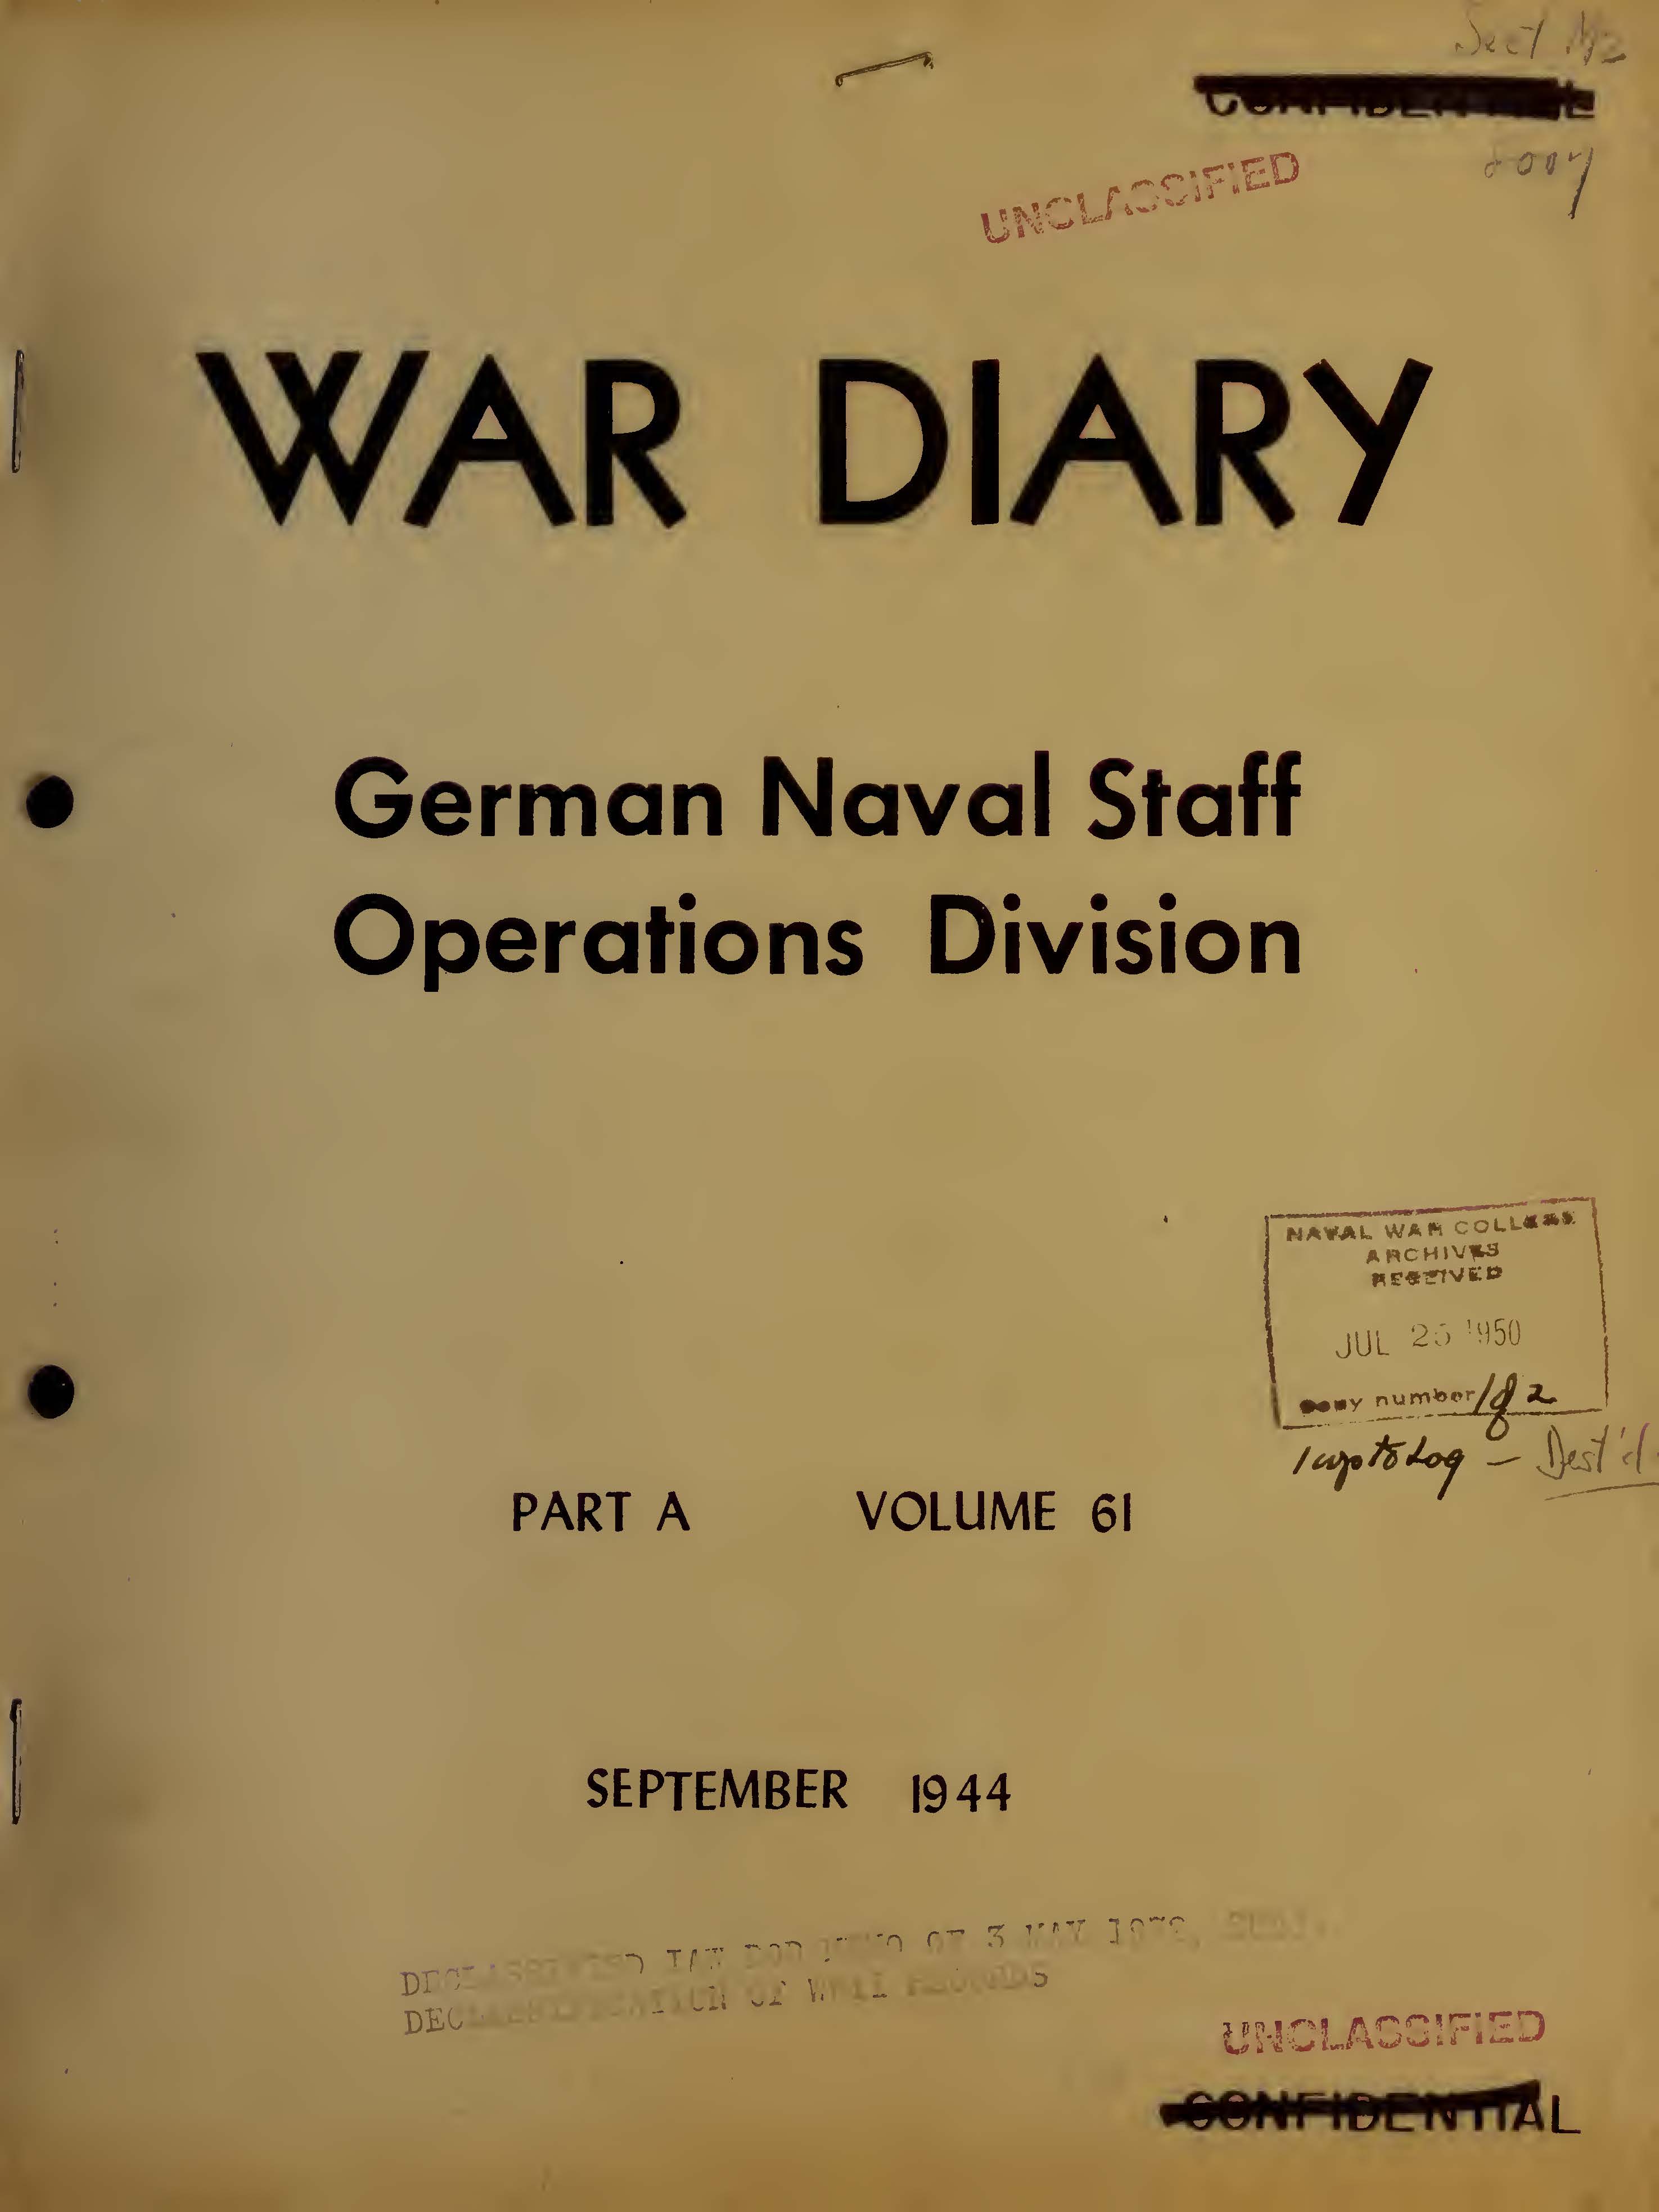 War Diary of German Naval Staff (Operations Division) Part A, Volume 61, September 1944